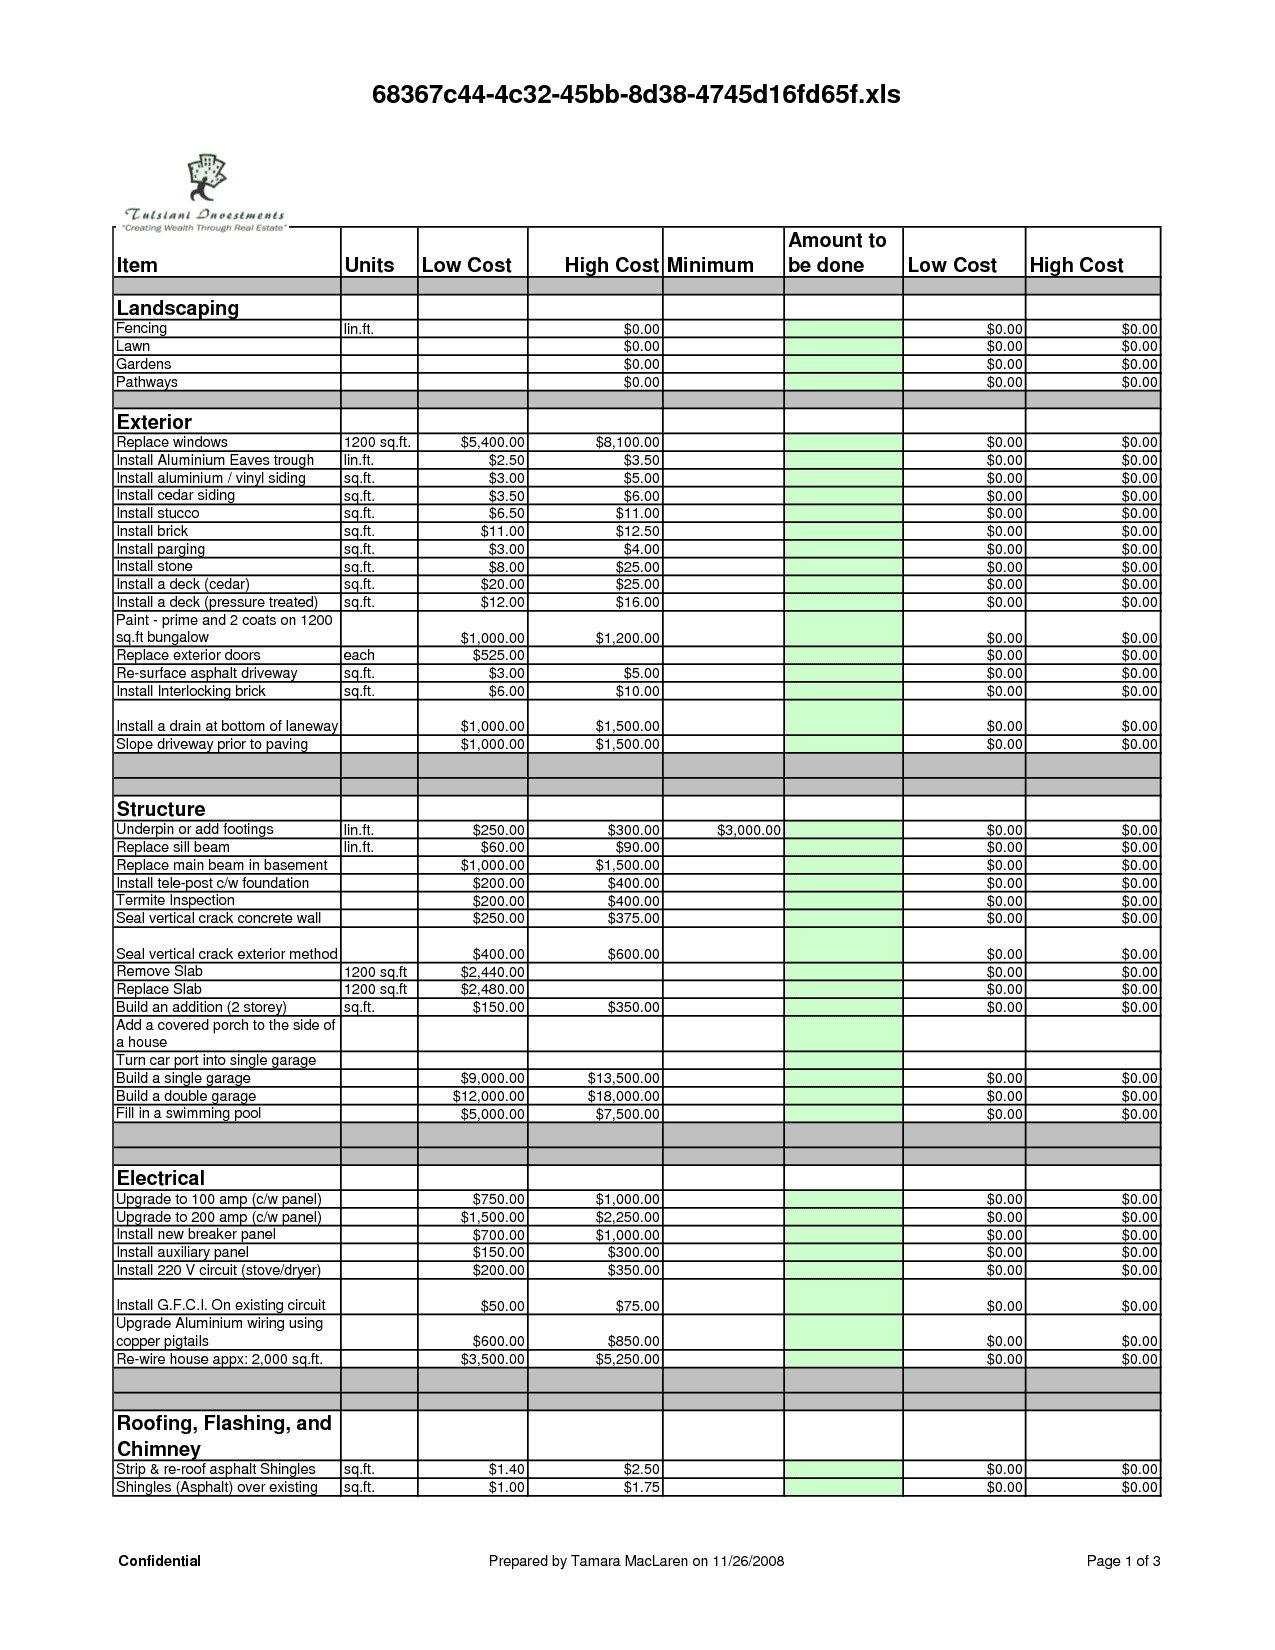 Home Construction Budget Spreadsheet And Construction Divisions List Excel